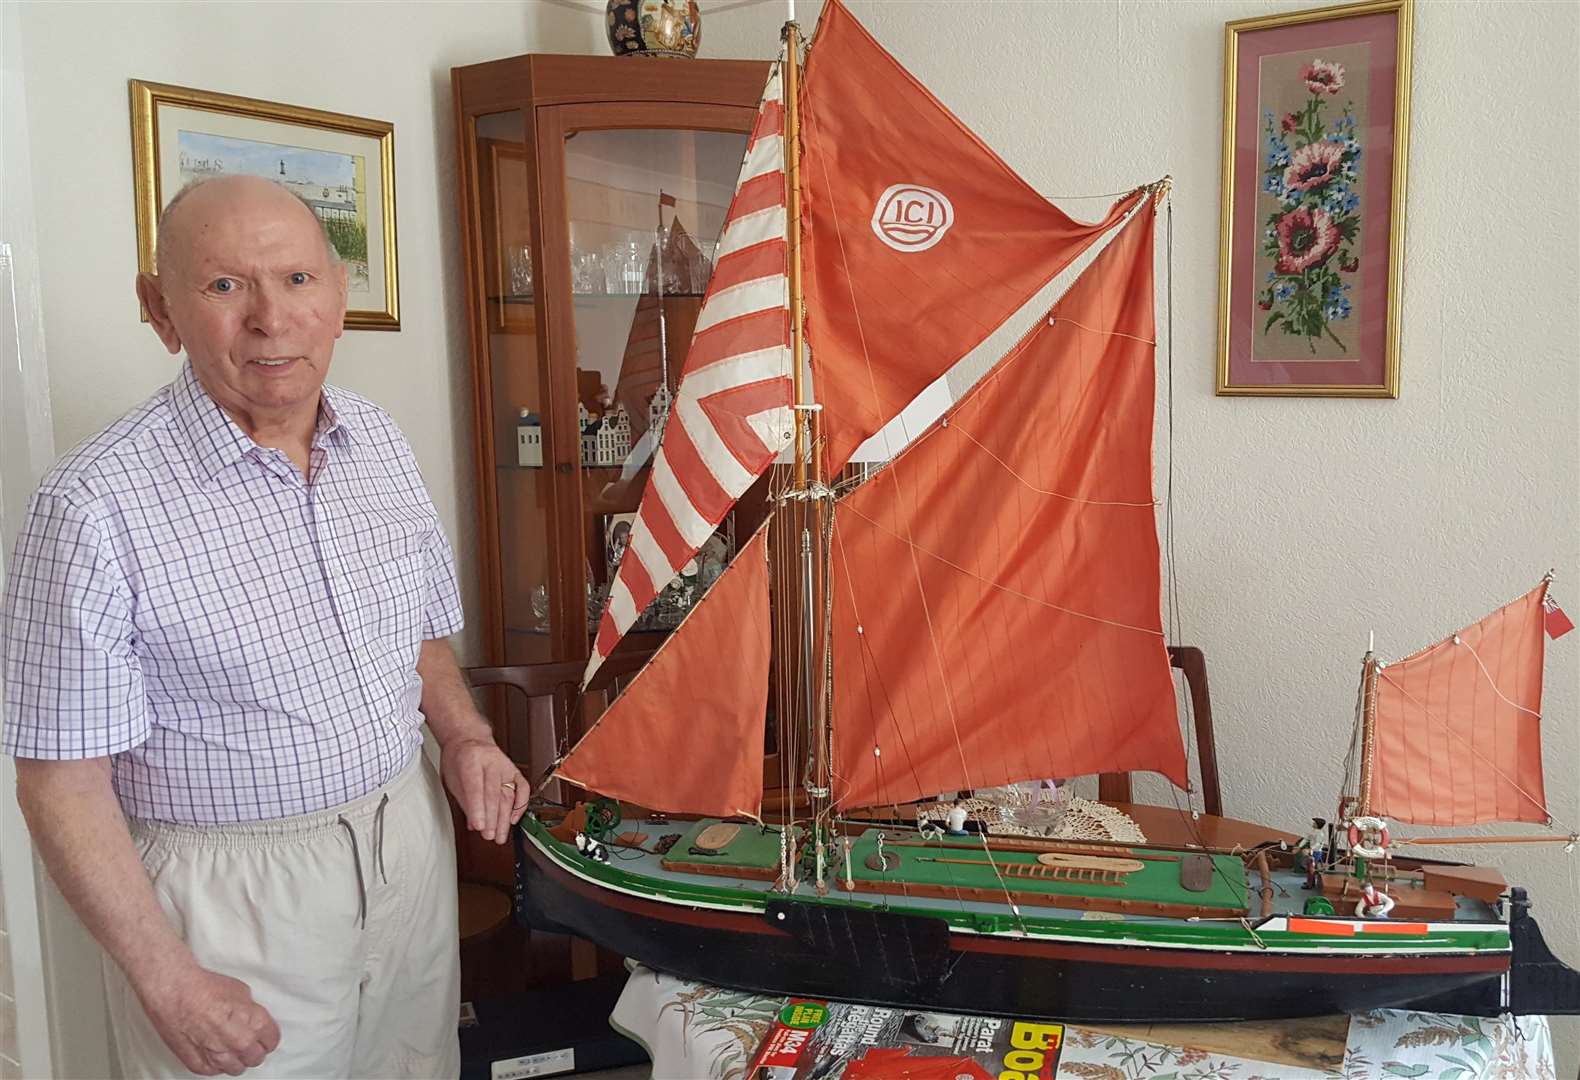 Bill Sutherland with his model of the barge Revival which he sails on local lakes